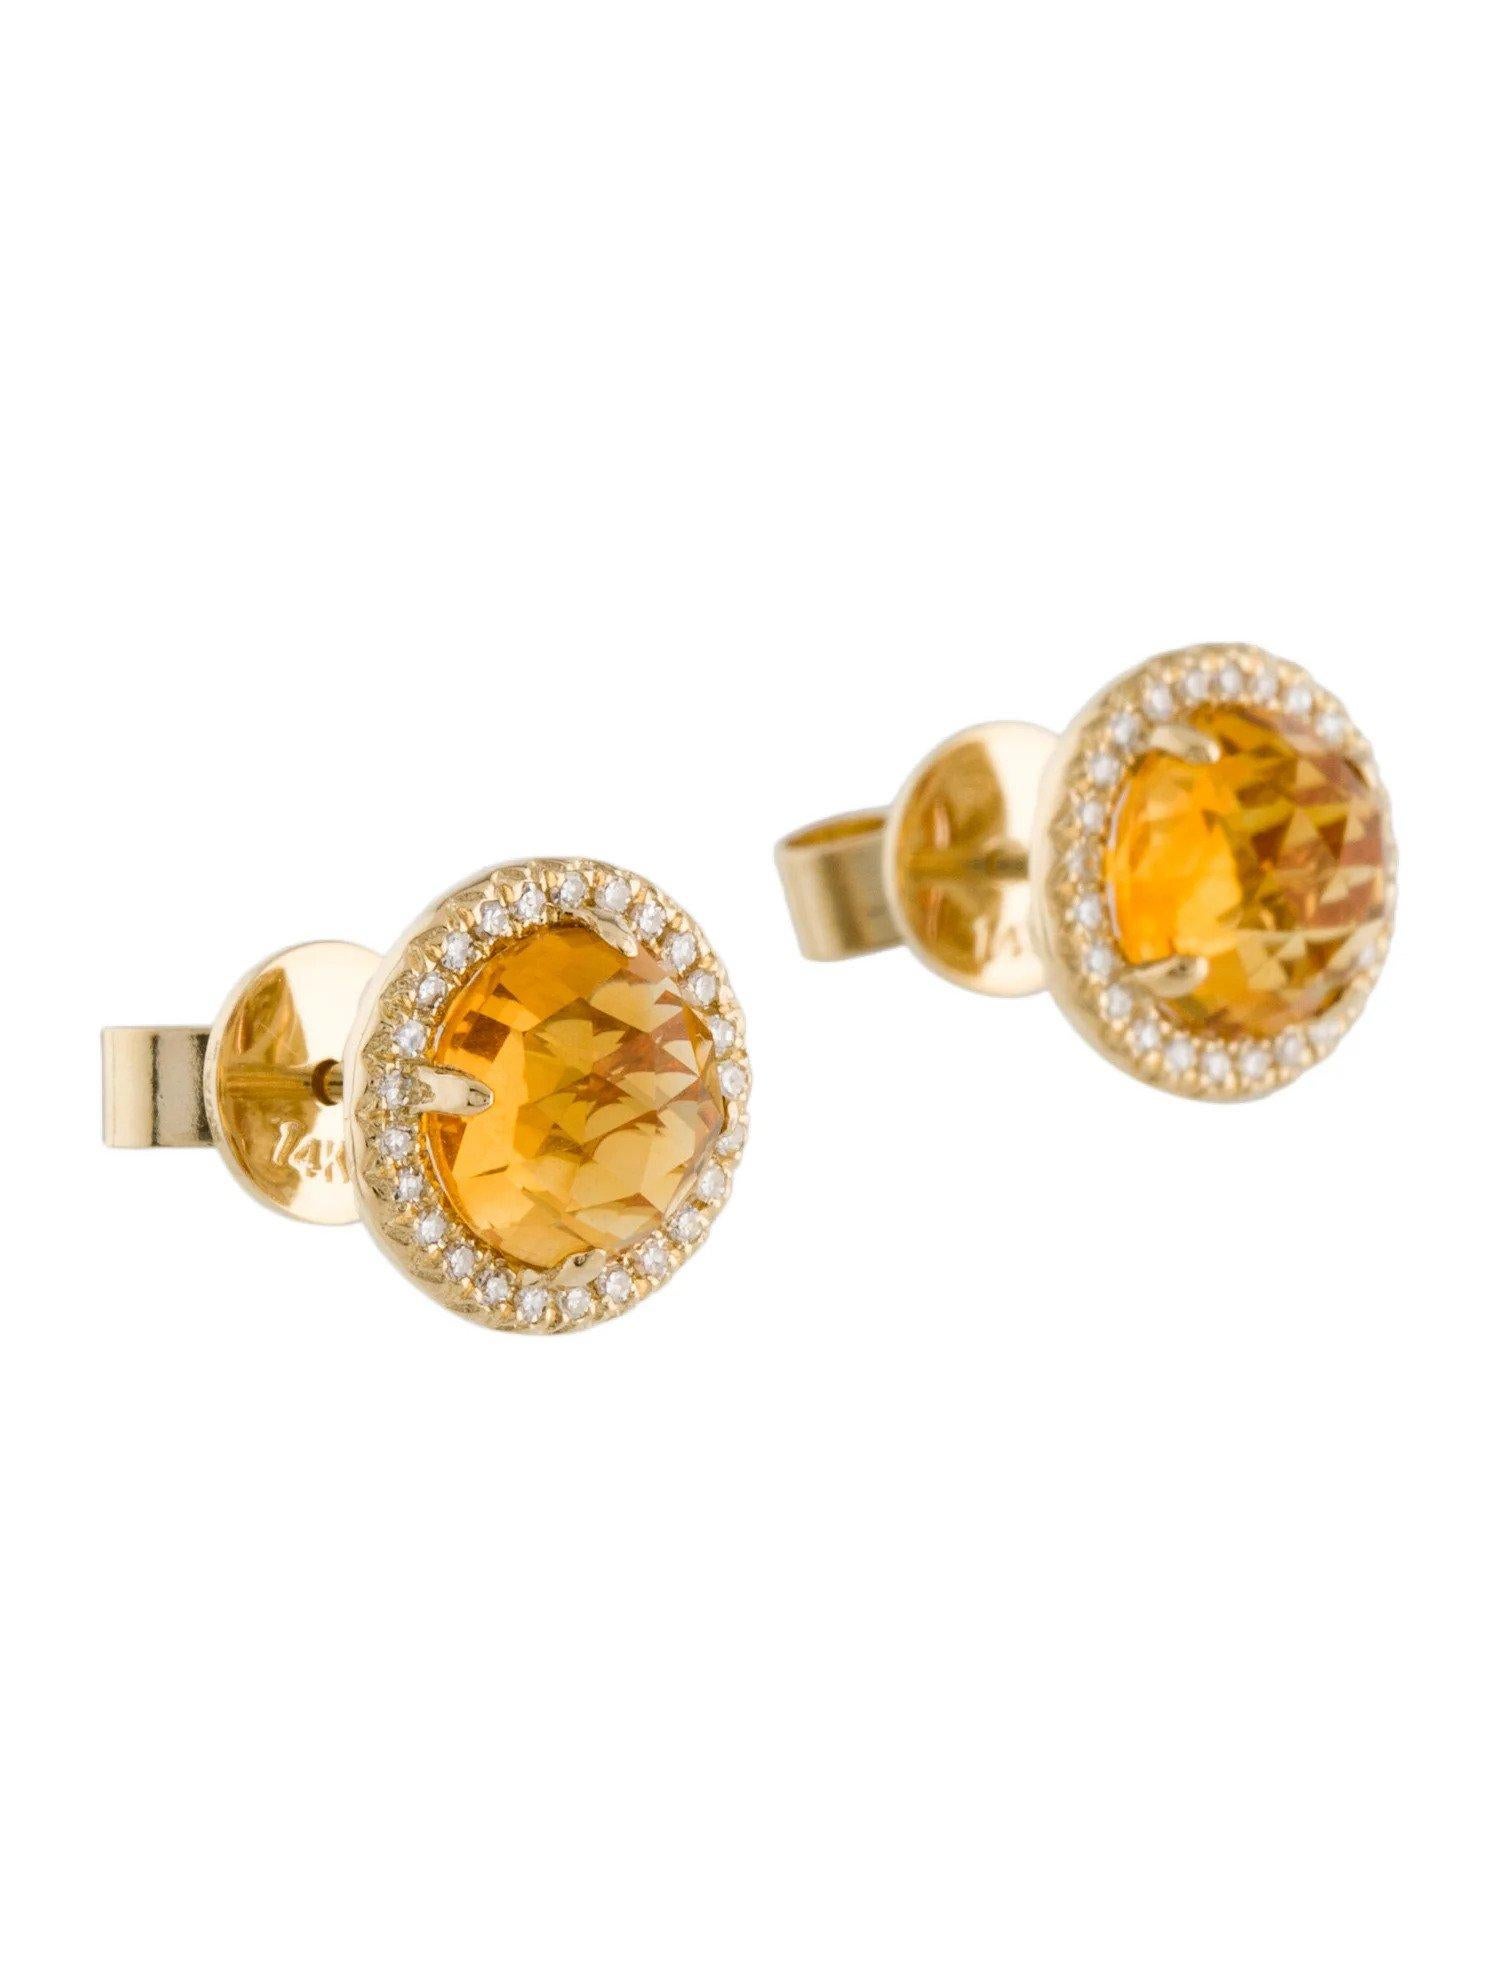 1.83 Carat Round Citrine & Diamond Yellow Gold Stud Earrings  In New Condition For Sale In Great Neck, NY